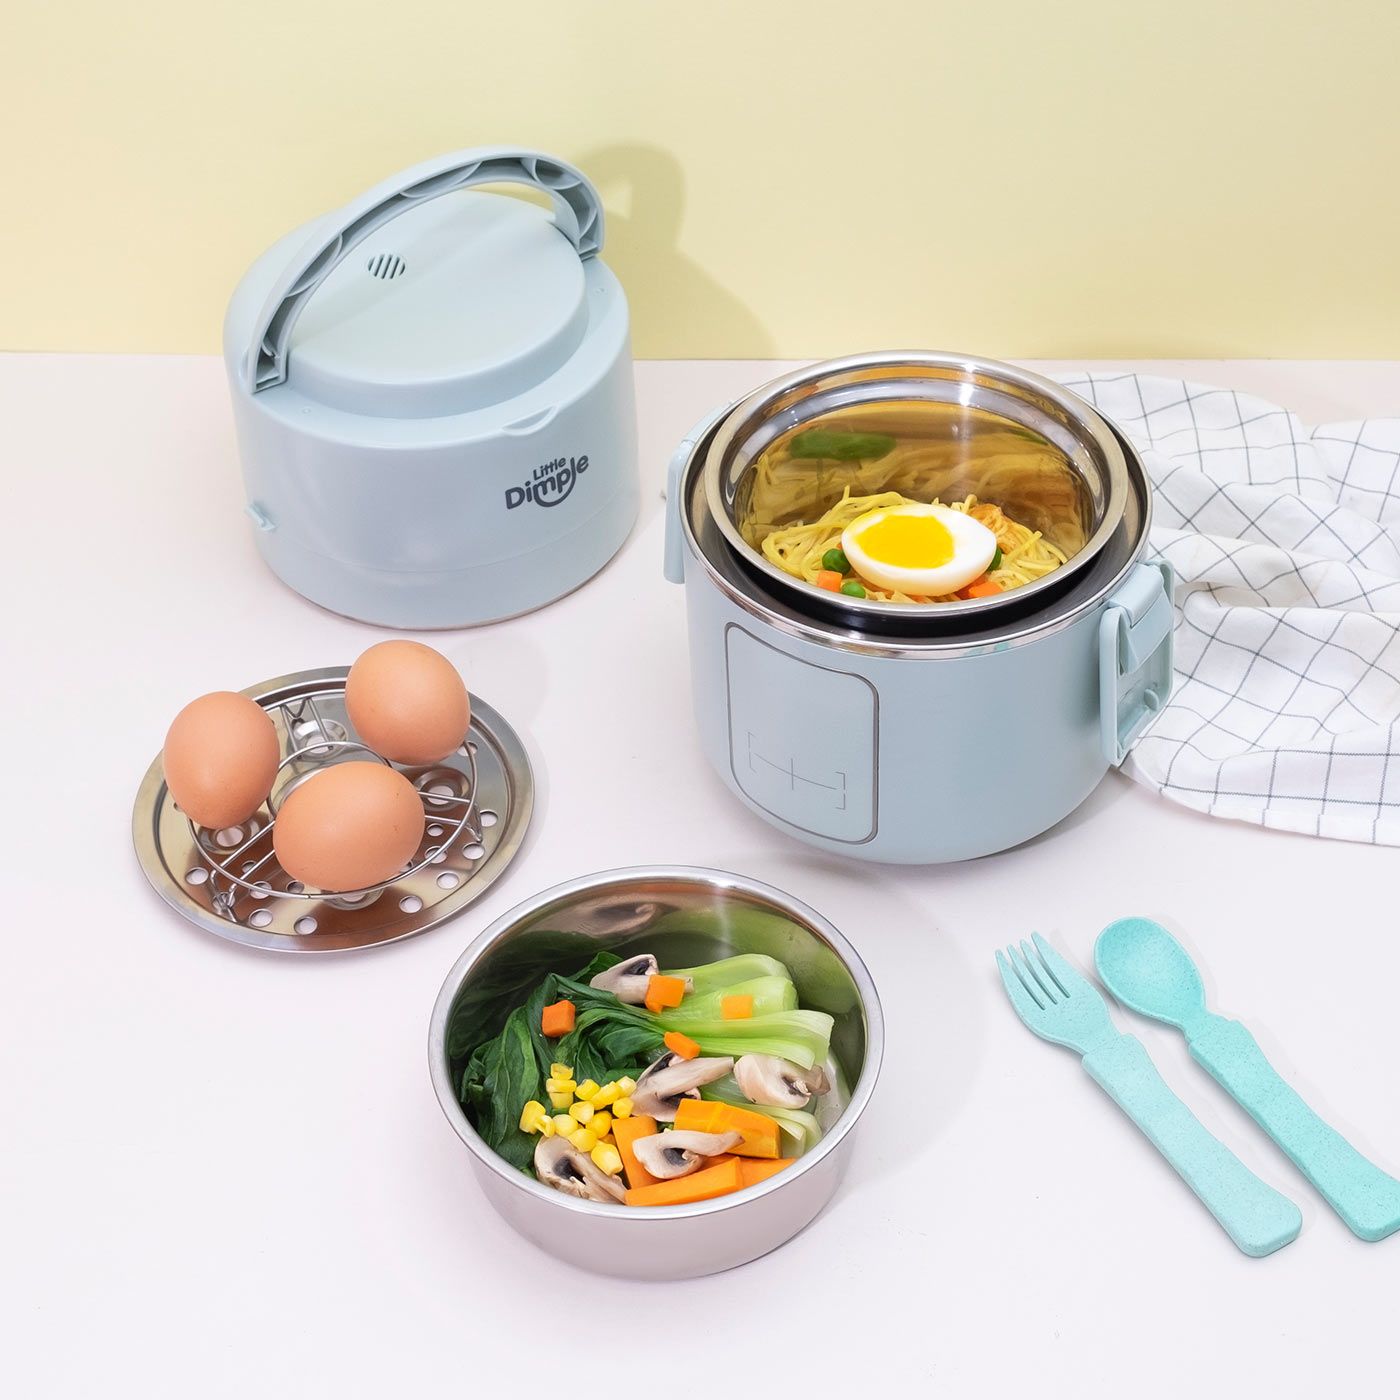 Little Dimple Portable Cooker Green - 4